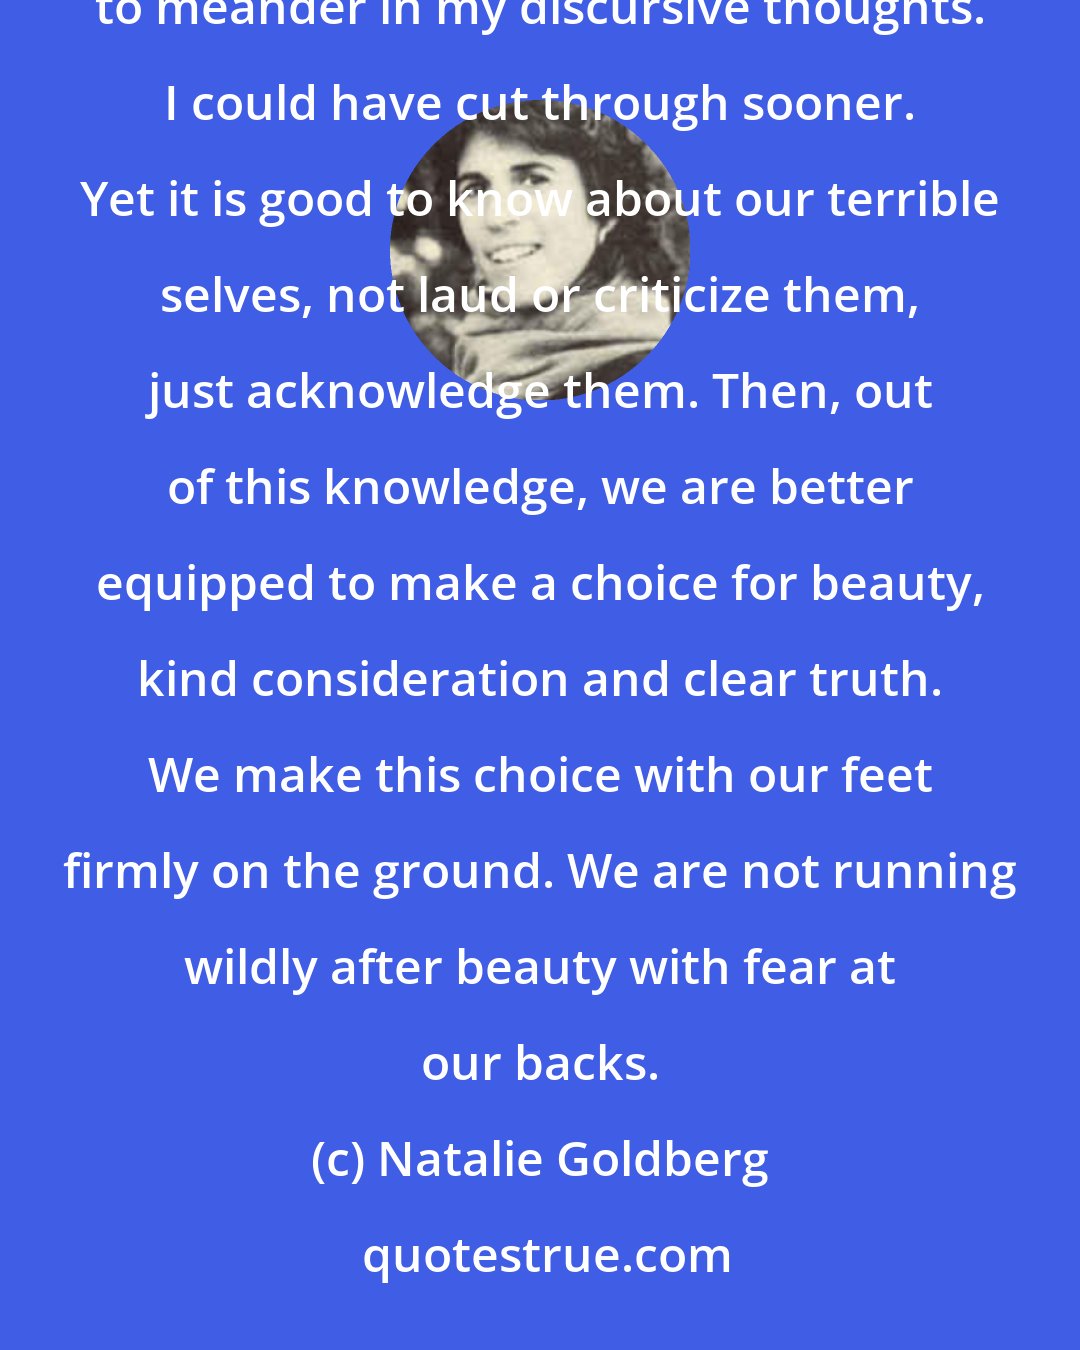 Natalie Goldberg: Actually, when I look at my old notebooks, I think I have been a bit self-indulgent and have given myself too much time to meander in my discursive thoughts. I could have cut through sooner. Yet it is good to know about our terrible selves, not laud or criticize them, just acknowledge them. Then, out of this knowledge, we are better equipped to make a choice for beauty, kind consideration and clear truth. We make this choice with our feet firmly on the ground. We are not running wildly after beauty with fear at our backs.